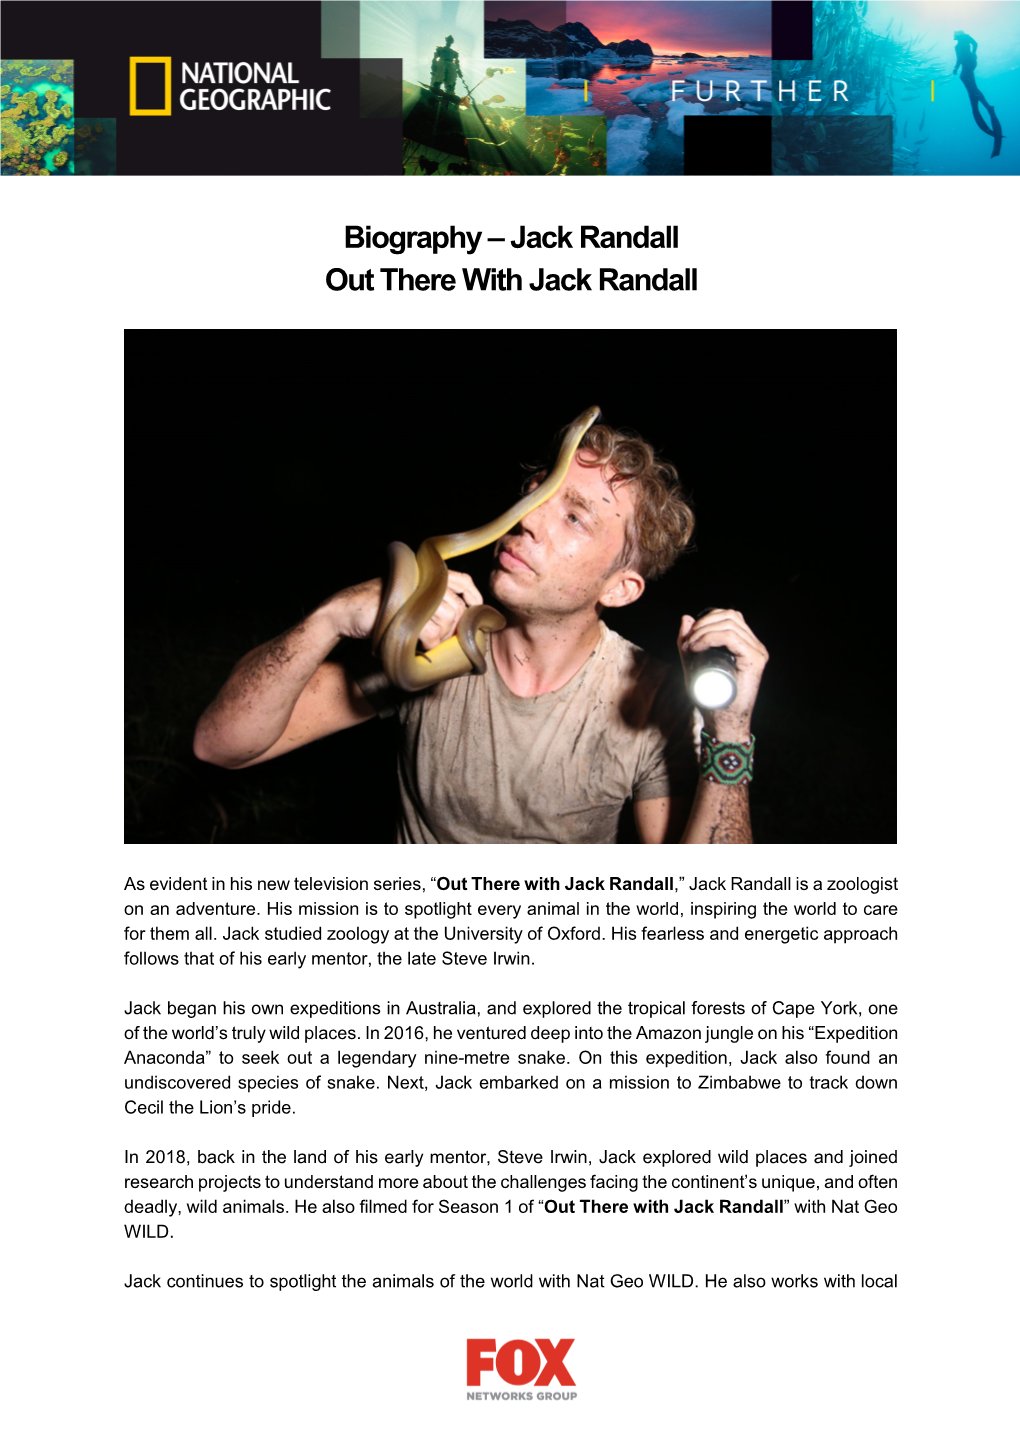 Biography – Jack Randall out There with Jack Randall